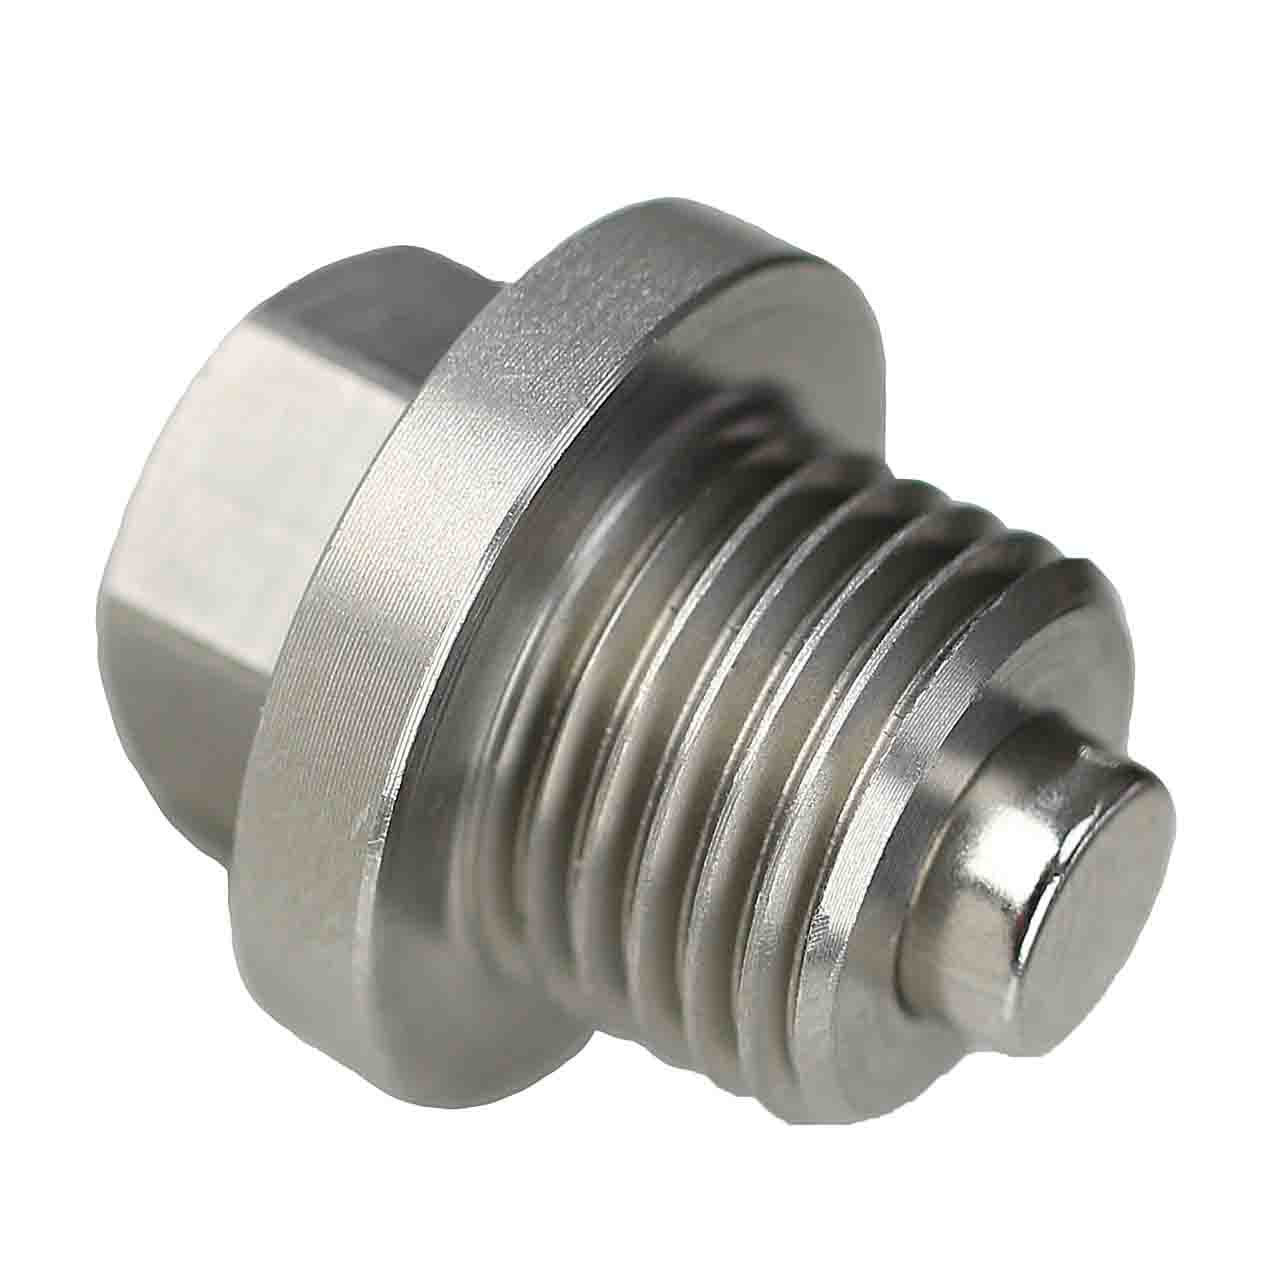 MG 1300 Magnetic Oil Drain Plug - 1968-1969 - 1.3 Liter - 4 Cylinder - Made In USA - Stainless Steel - Part Number 88G257